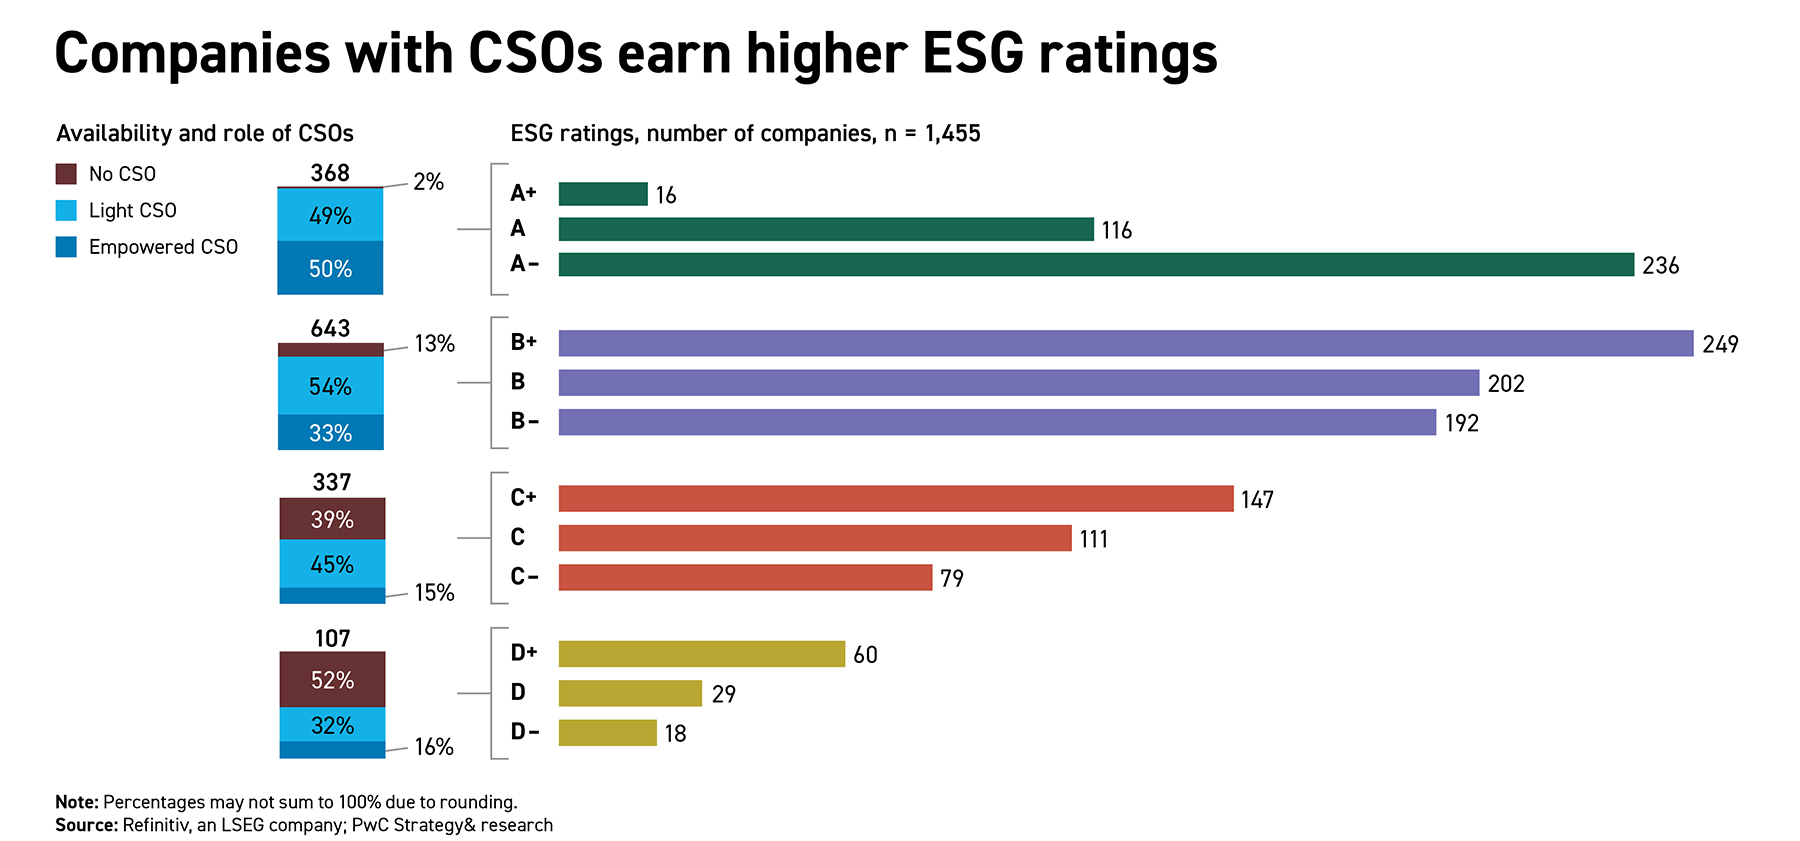 Bar chart showing that companies with CSOs earn higher ESG ratings.